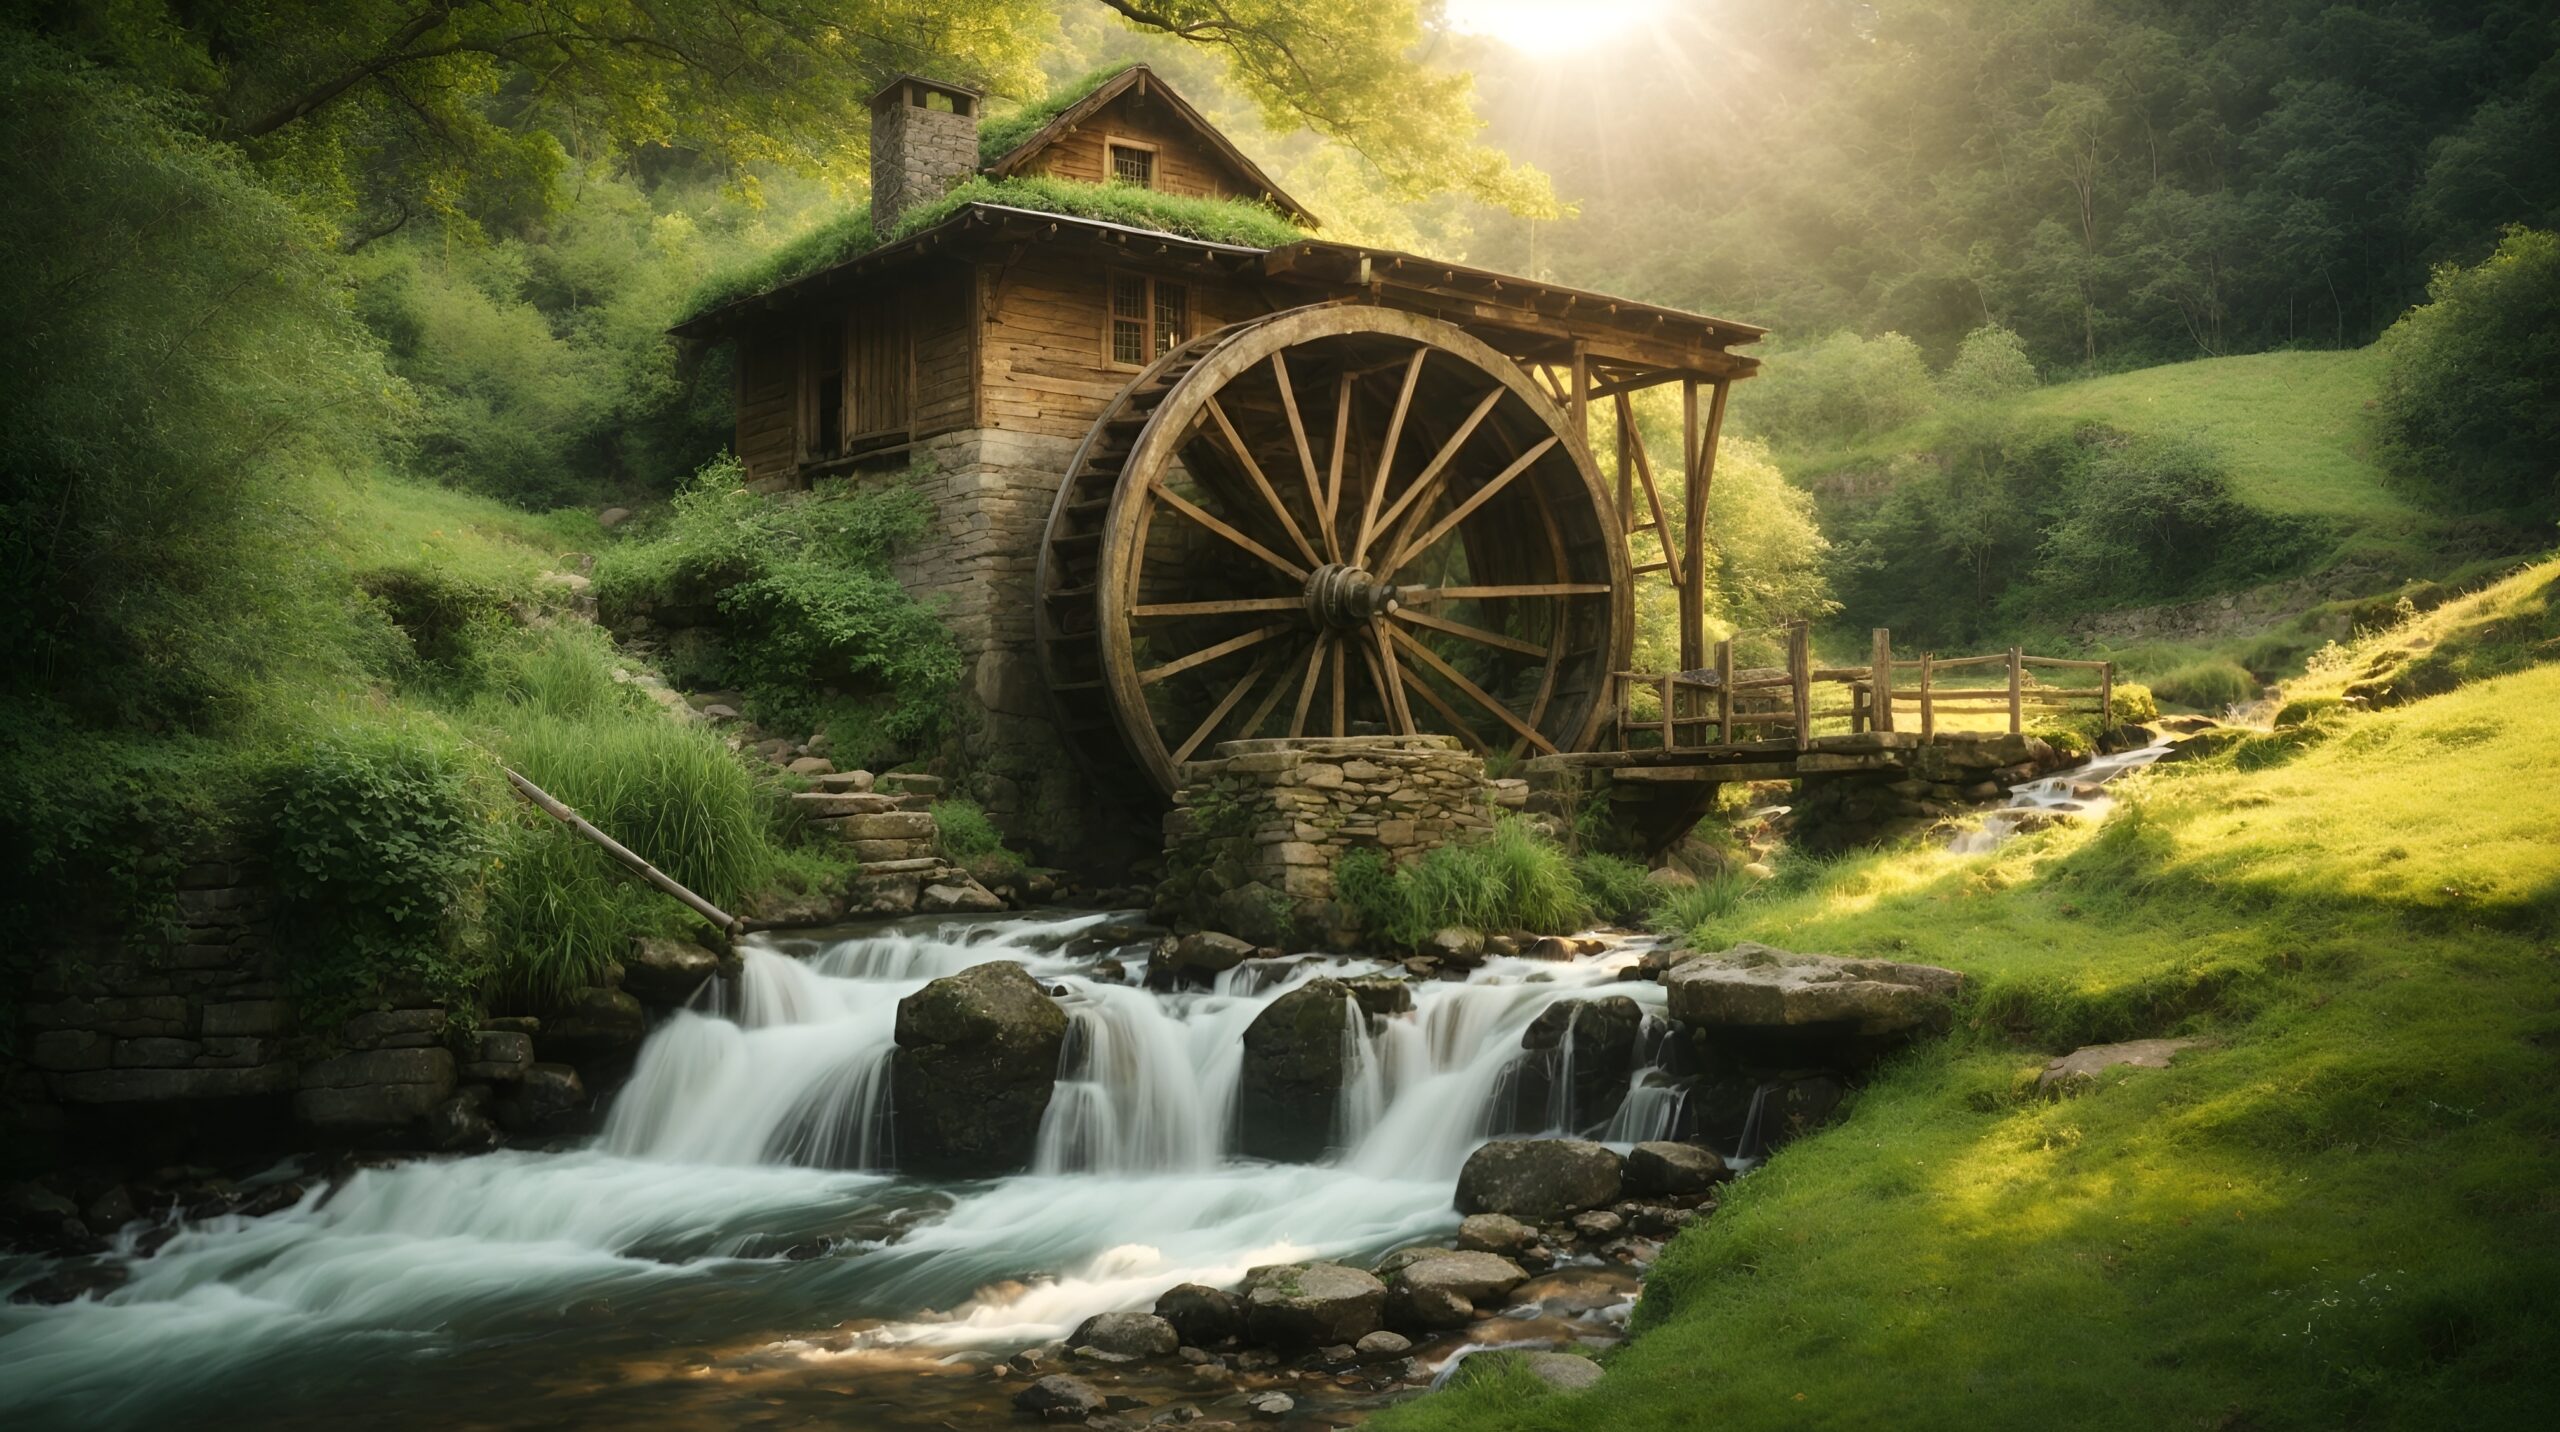 A rustic water wheel nestled in a lush green valley